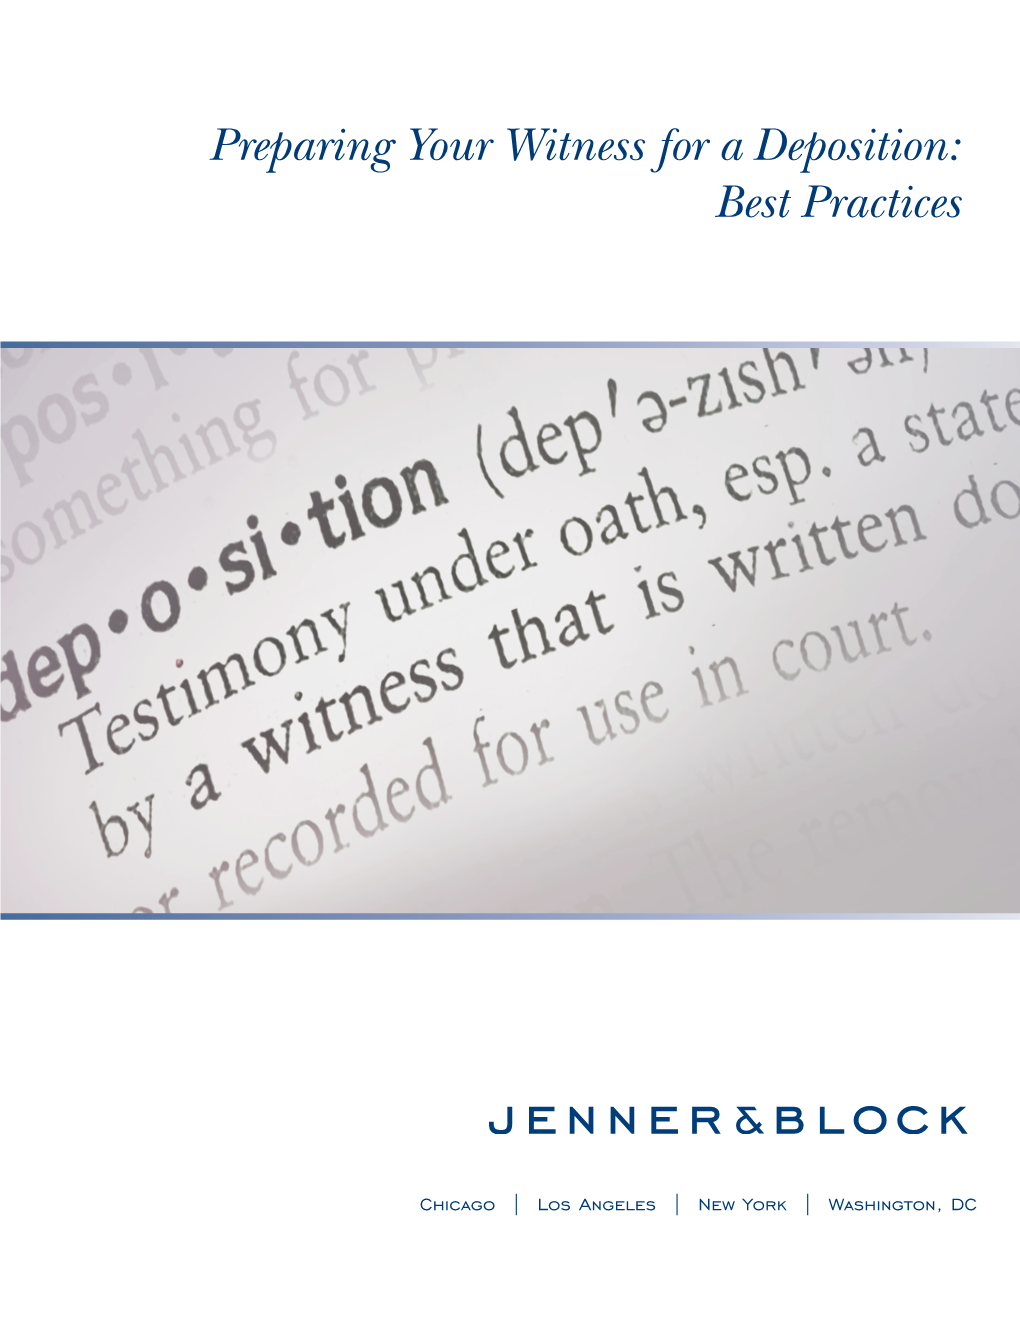 Preparing Your Witness for a Deposition: Best Practices